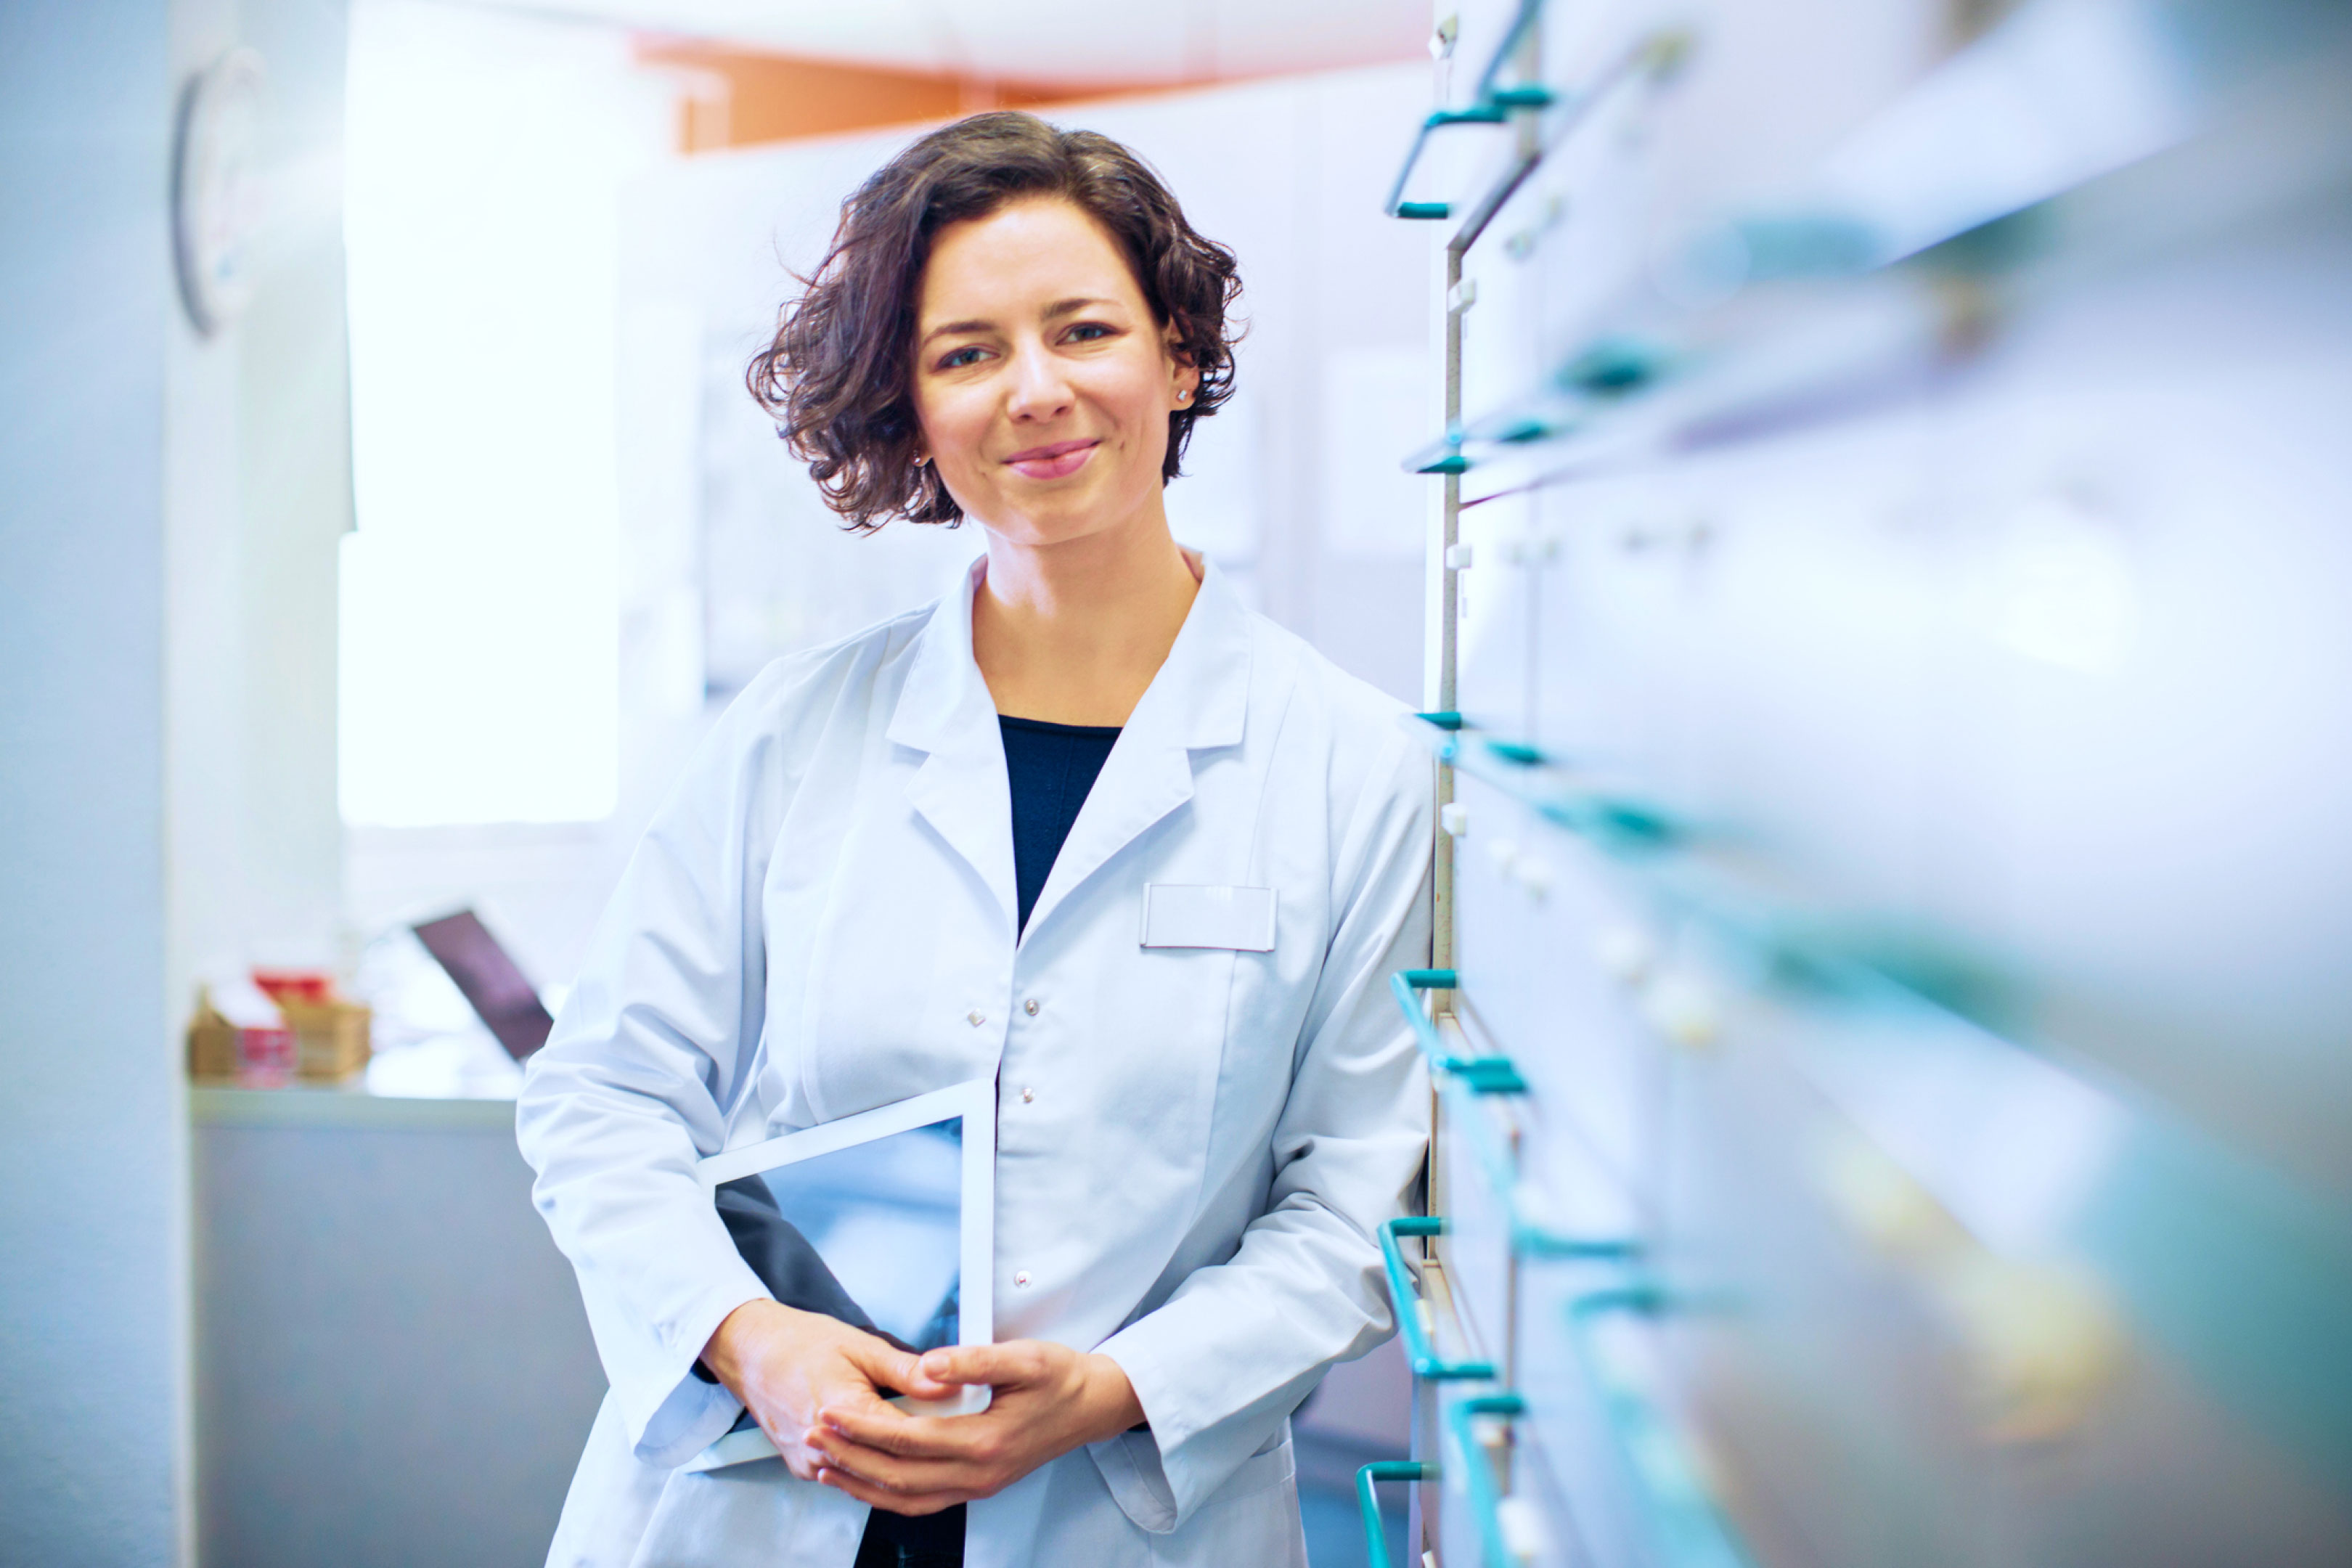 pharmacy administrator implementing 340b software to ensure highest level of patient care